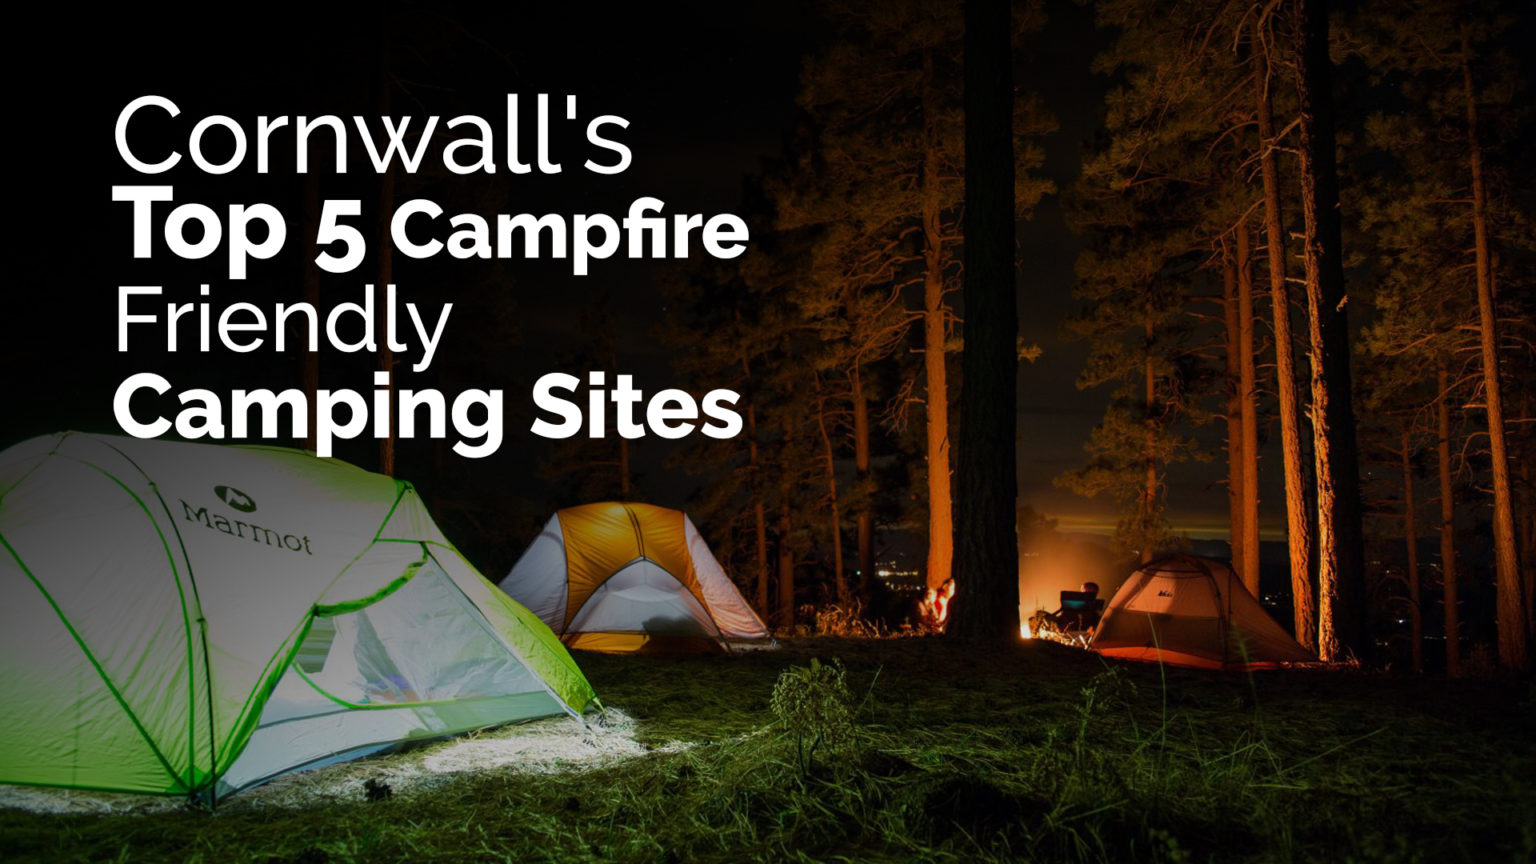 Cornwall's Top 5 Campfire Friendly Camping Sites